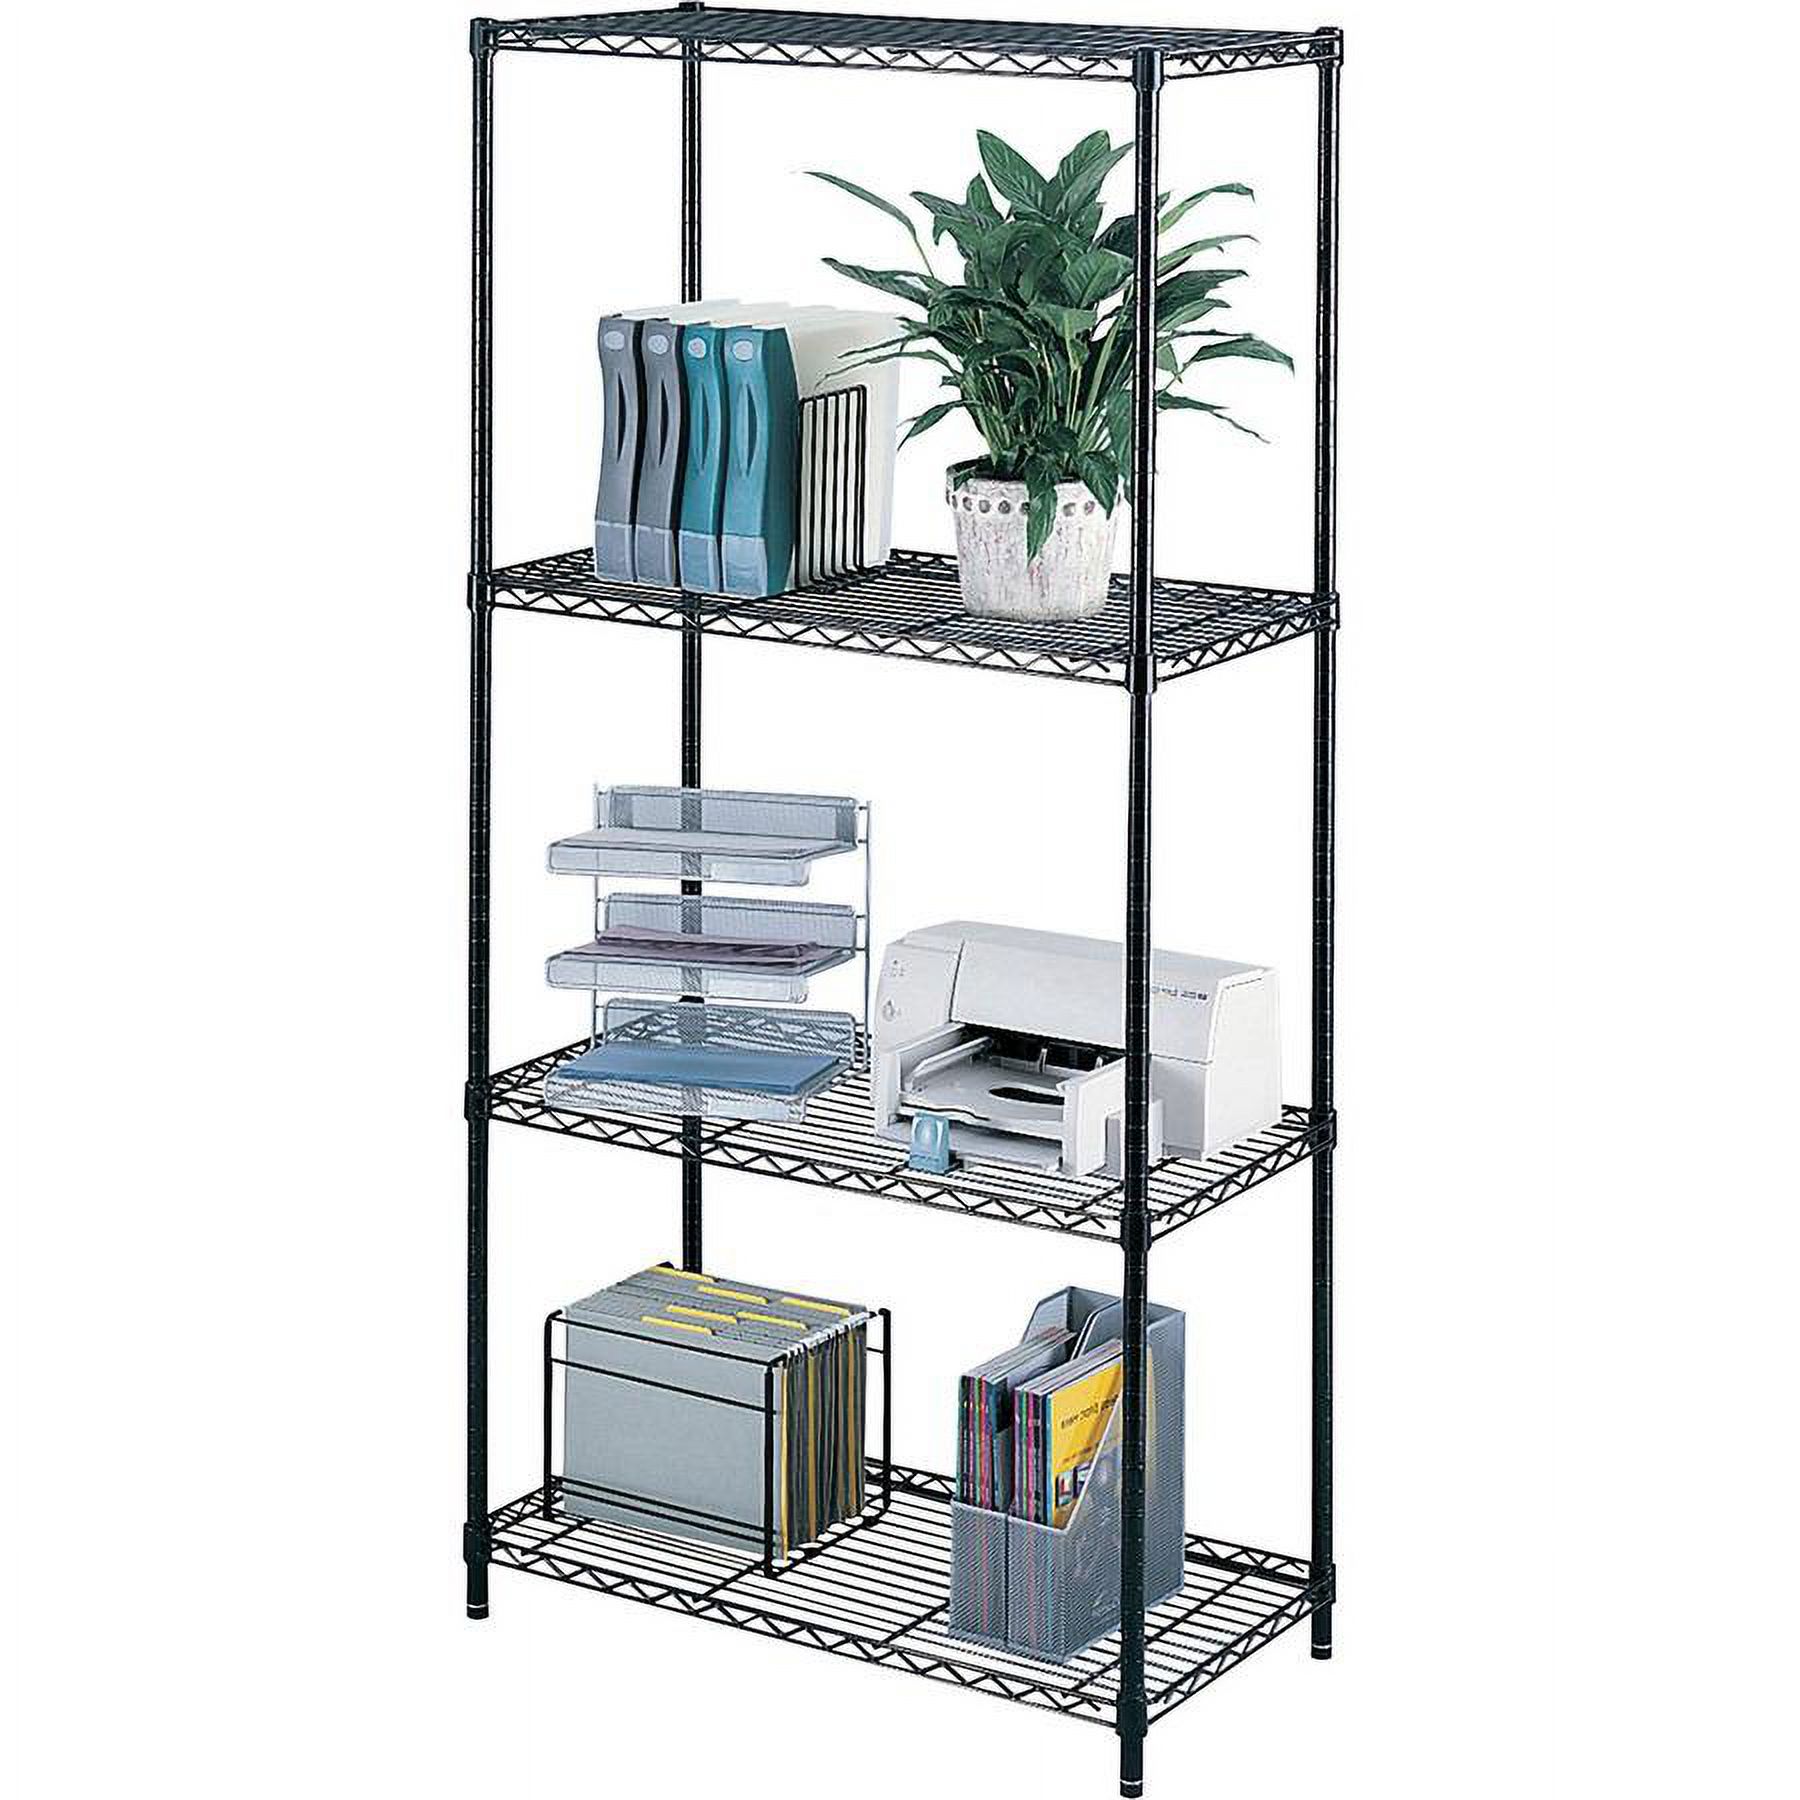 Safco Industrial Wire Shelving Starter Kit, Four-Shelf, 48w x 18d x 72h, Black - image 3 of 4